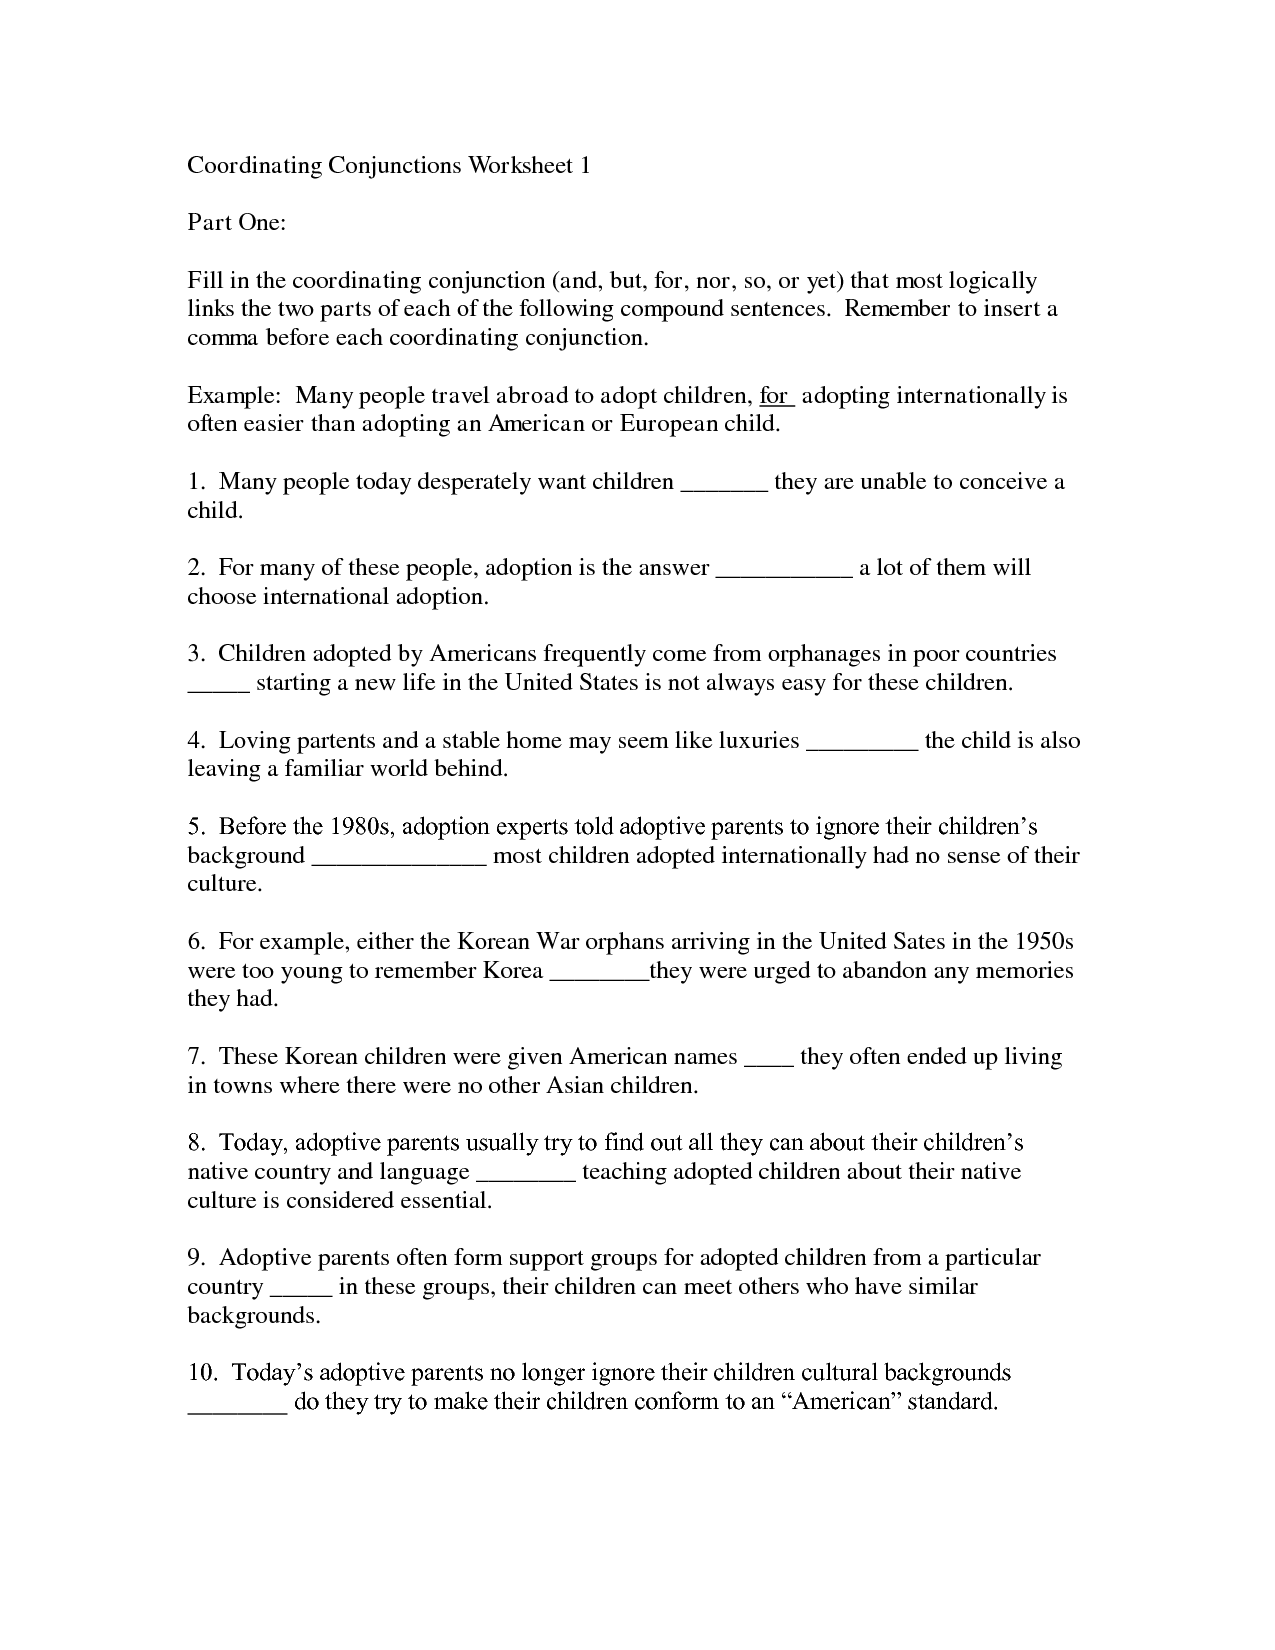 16 Best Images of Subordinating Conjunctions With Commas Worksheets  Coordinating and 